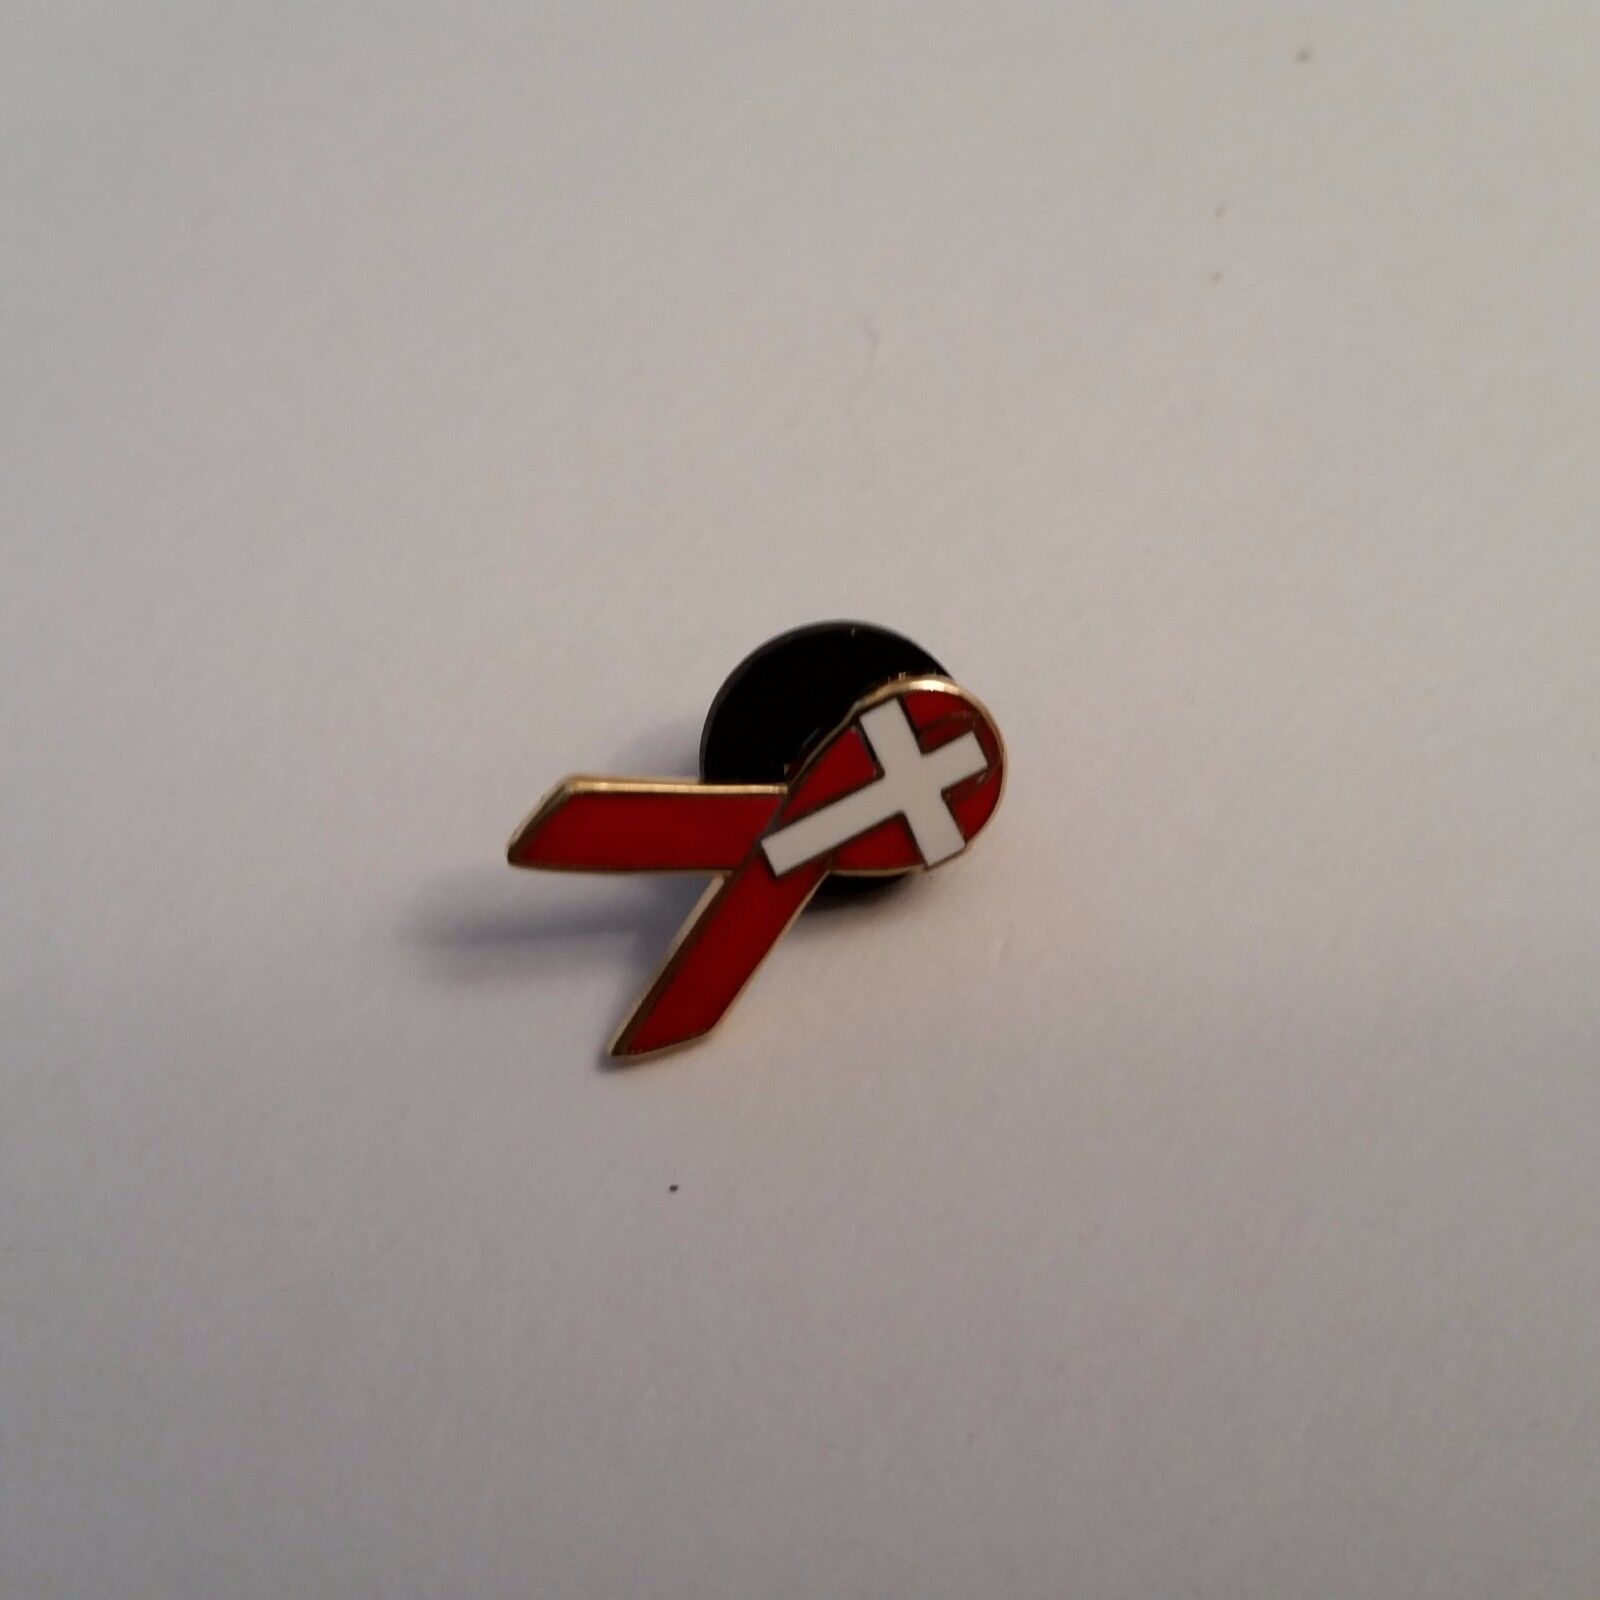 HIV AIDS of Heart Disease Lapel Pin Red Ribbon with White Cross